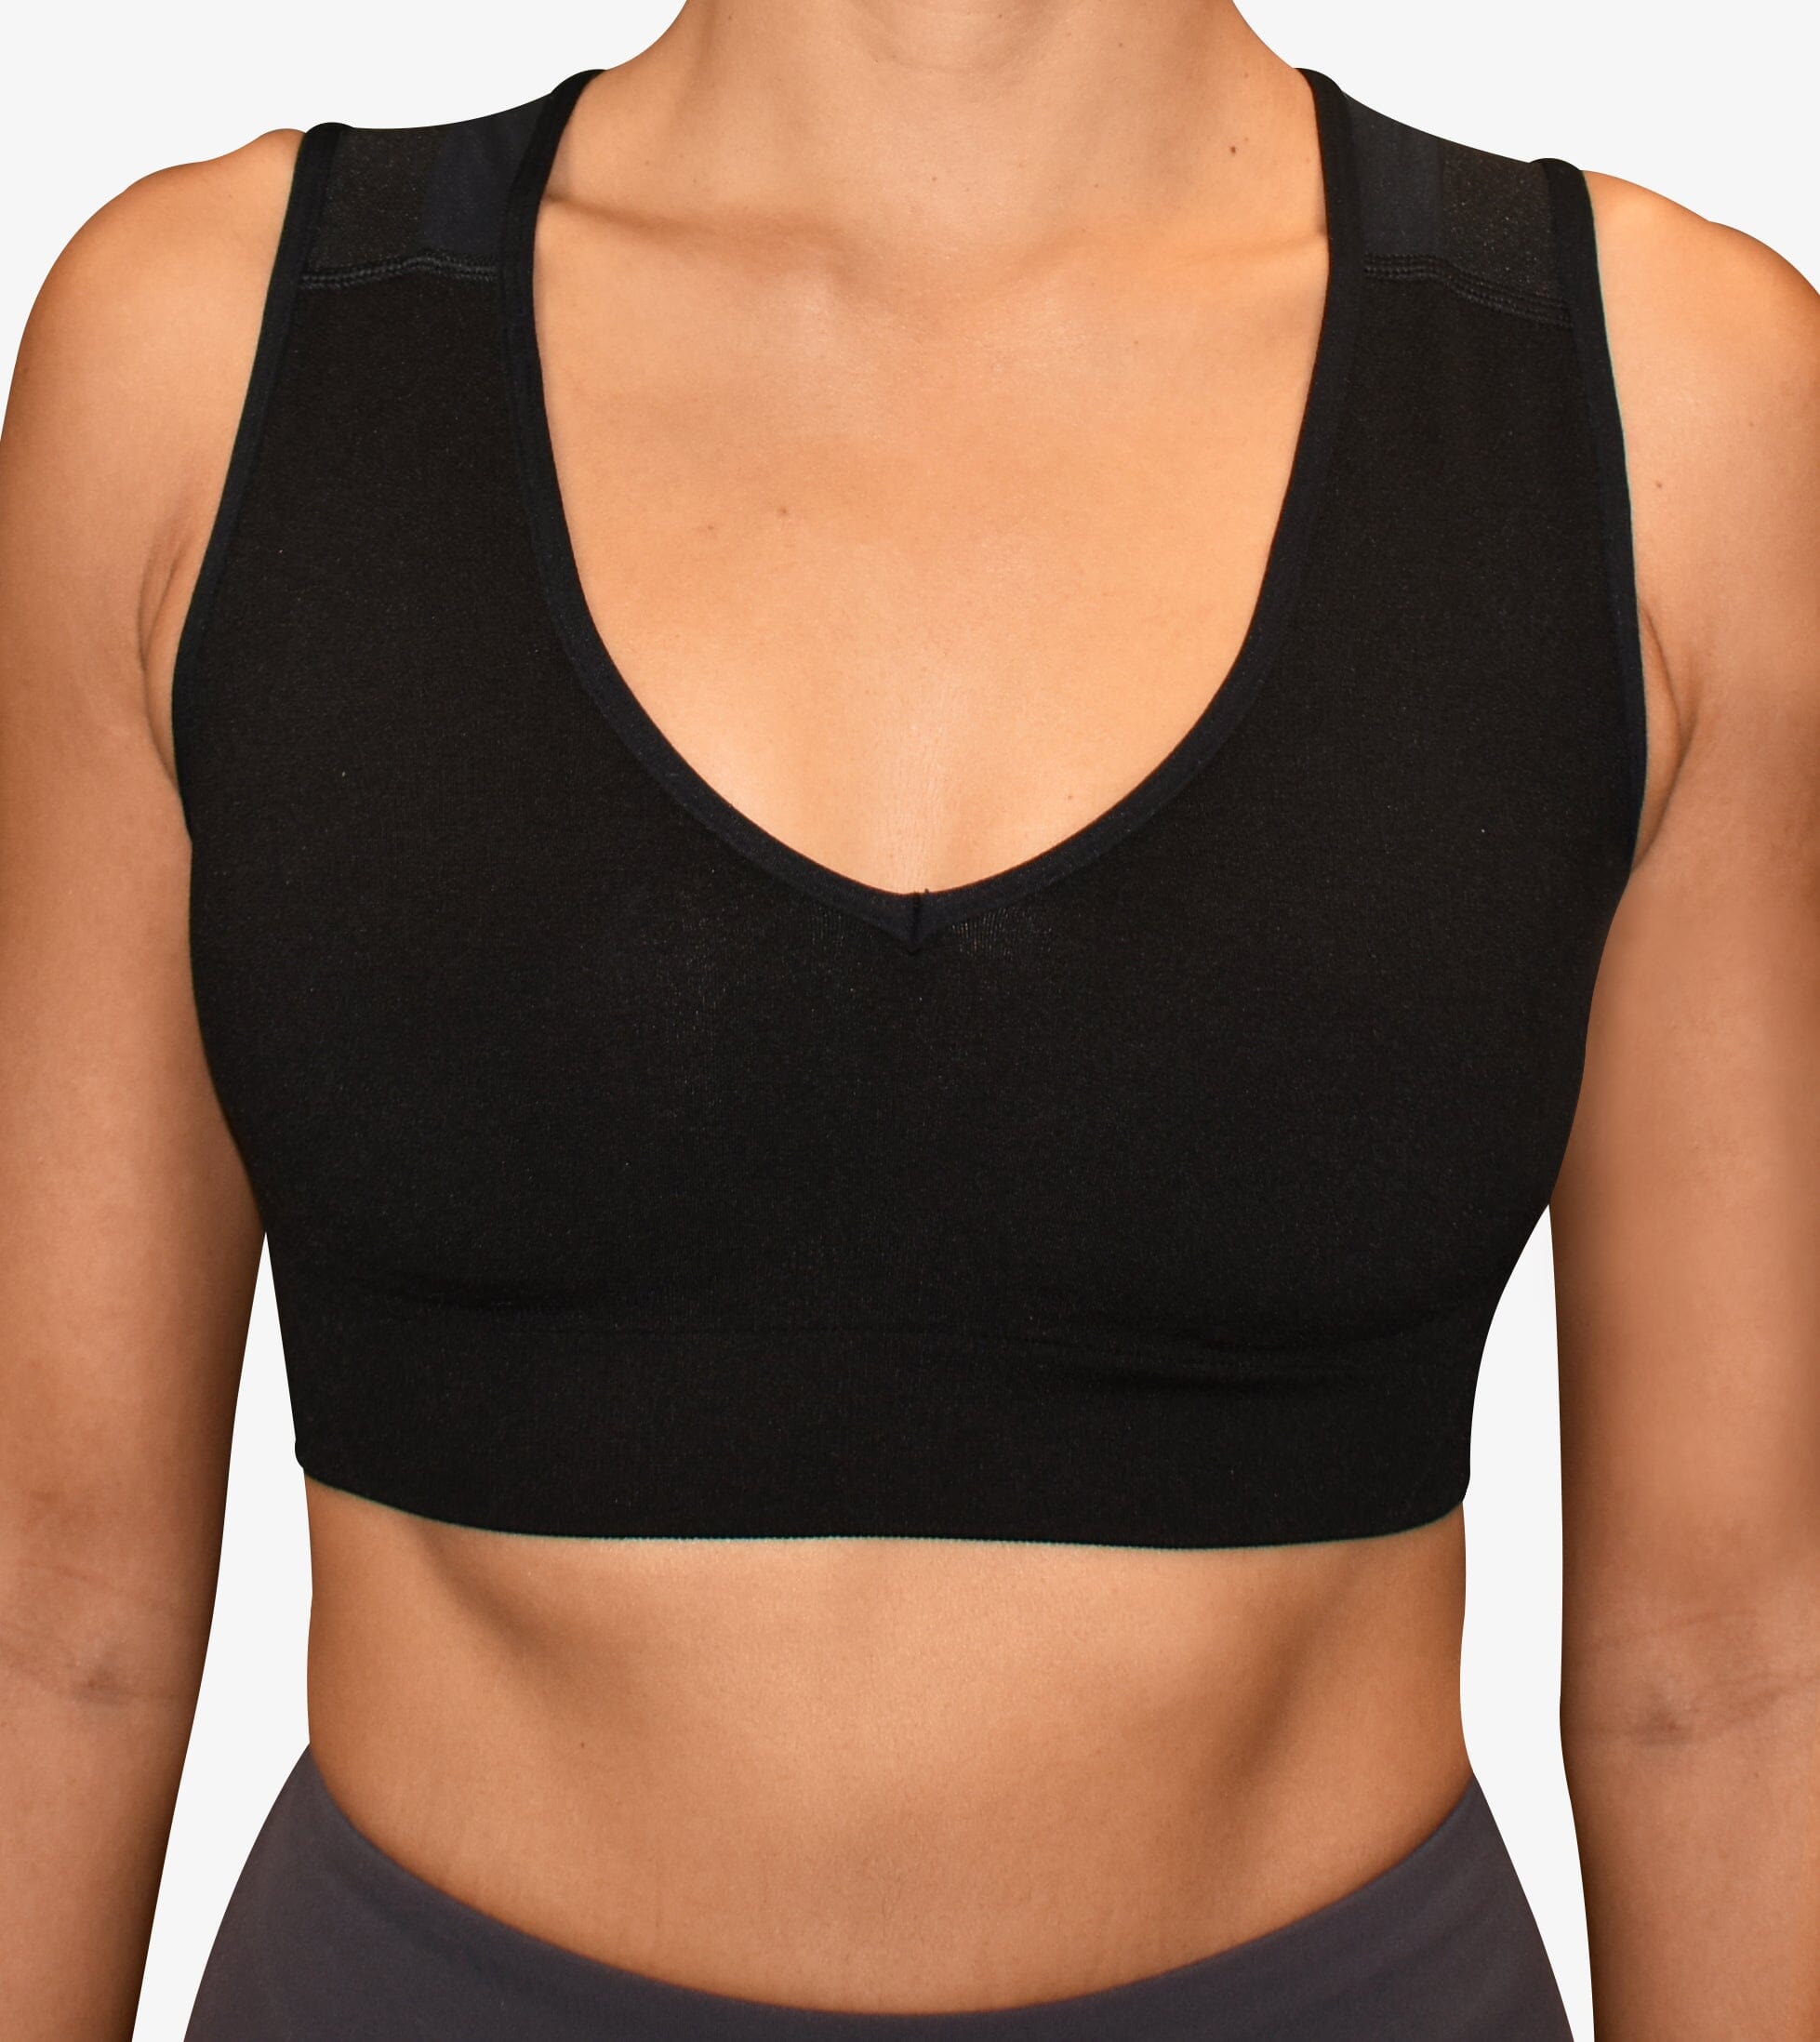  ALIGNMED Posture Sports Bra Seamless, Increase Upper Body  Strength & Oxygen Intake, Improve Support During Exercise & Shoulder  Mechanics for All Fitness Activities